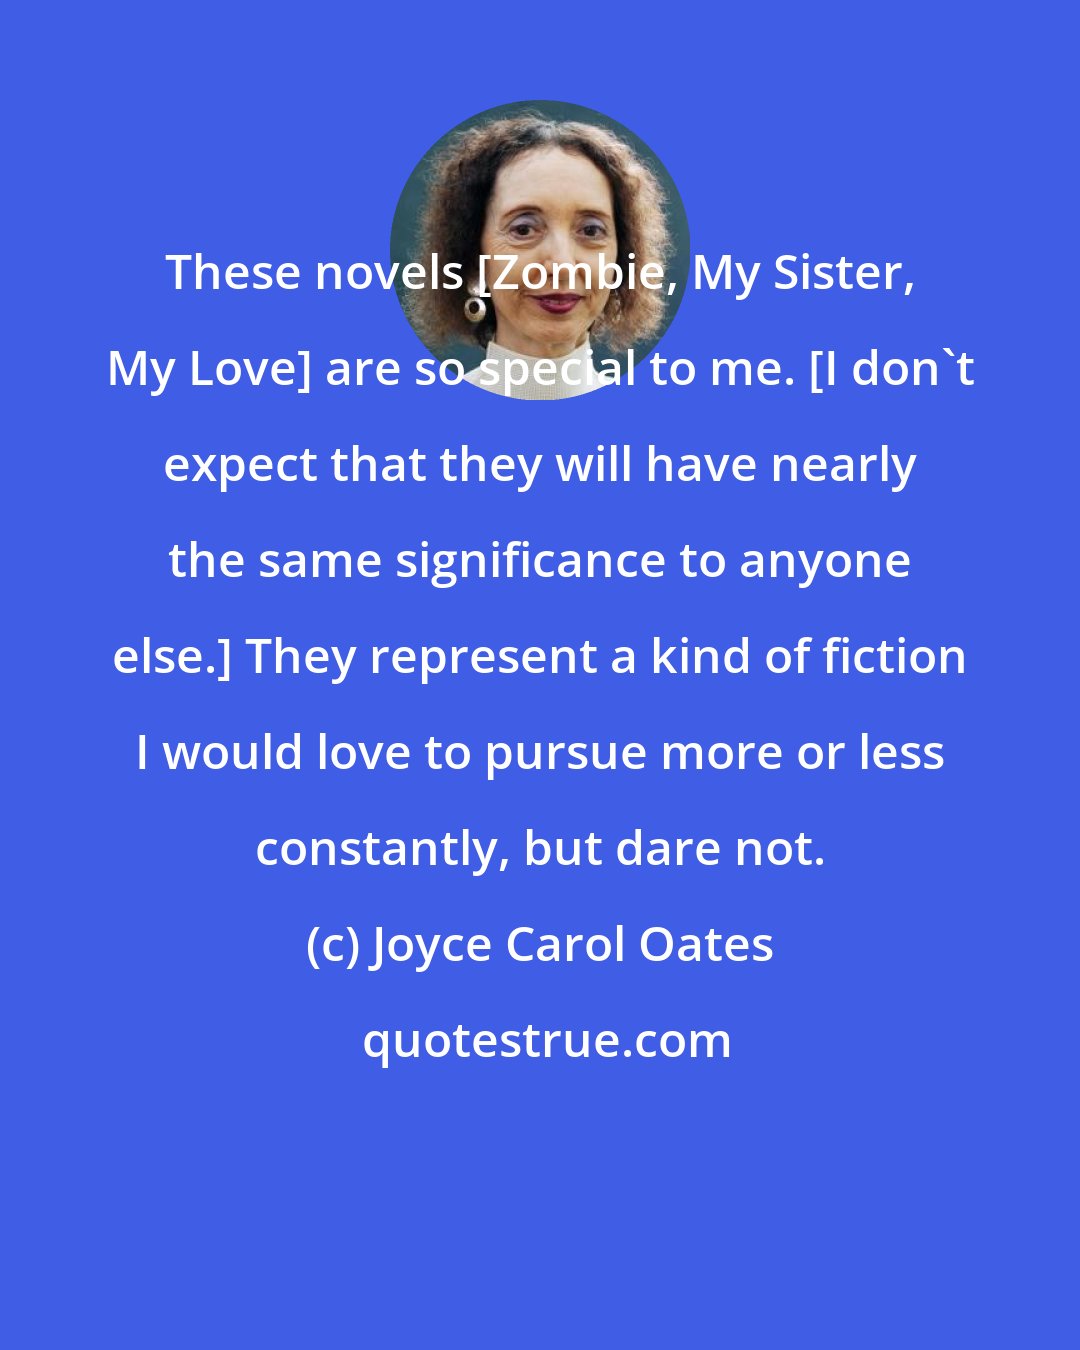 Joyce Carol Oates: These novels [Zombie, My Sister, My Love] are so special to me. [I don't expect that they will have nearly the same significance to anyone else.] They represent a kind of fiction I would love to pursue more or less constantly, but dare not.